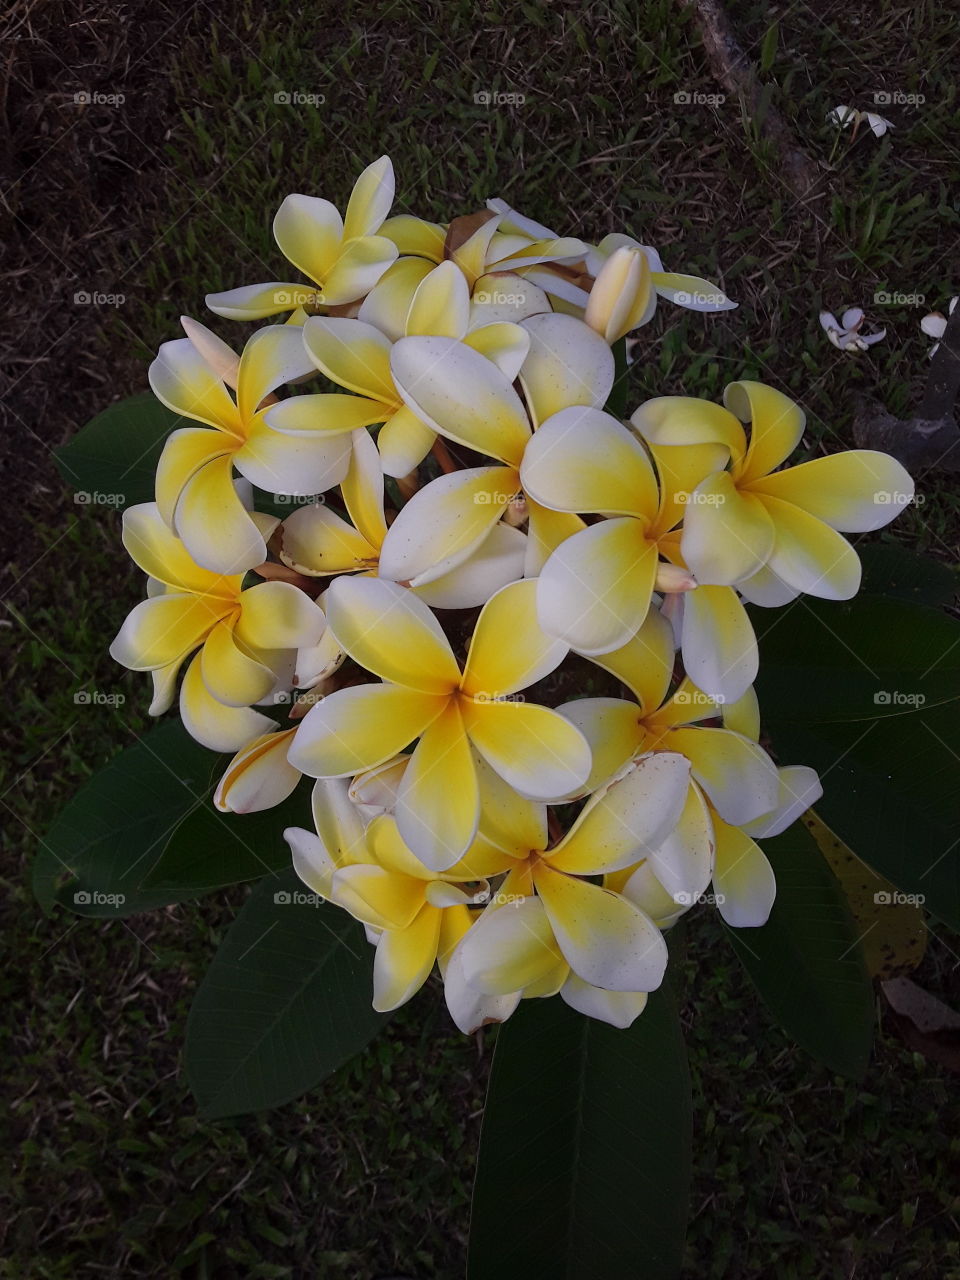 Frangapani flower a hybrid species does not cease to sprout flowers all year round always with gifted smile show off with its   desireable aroma.